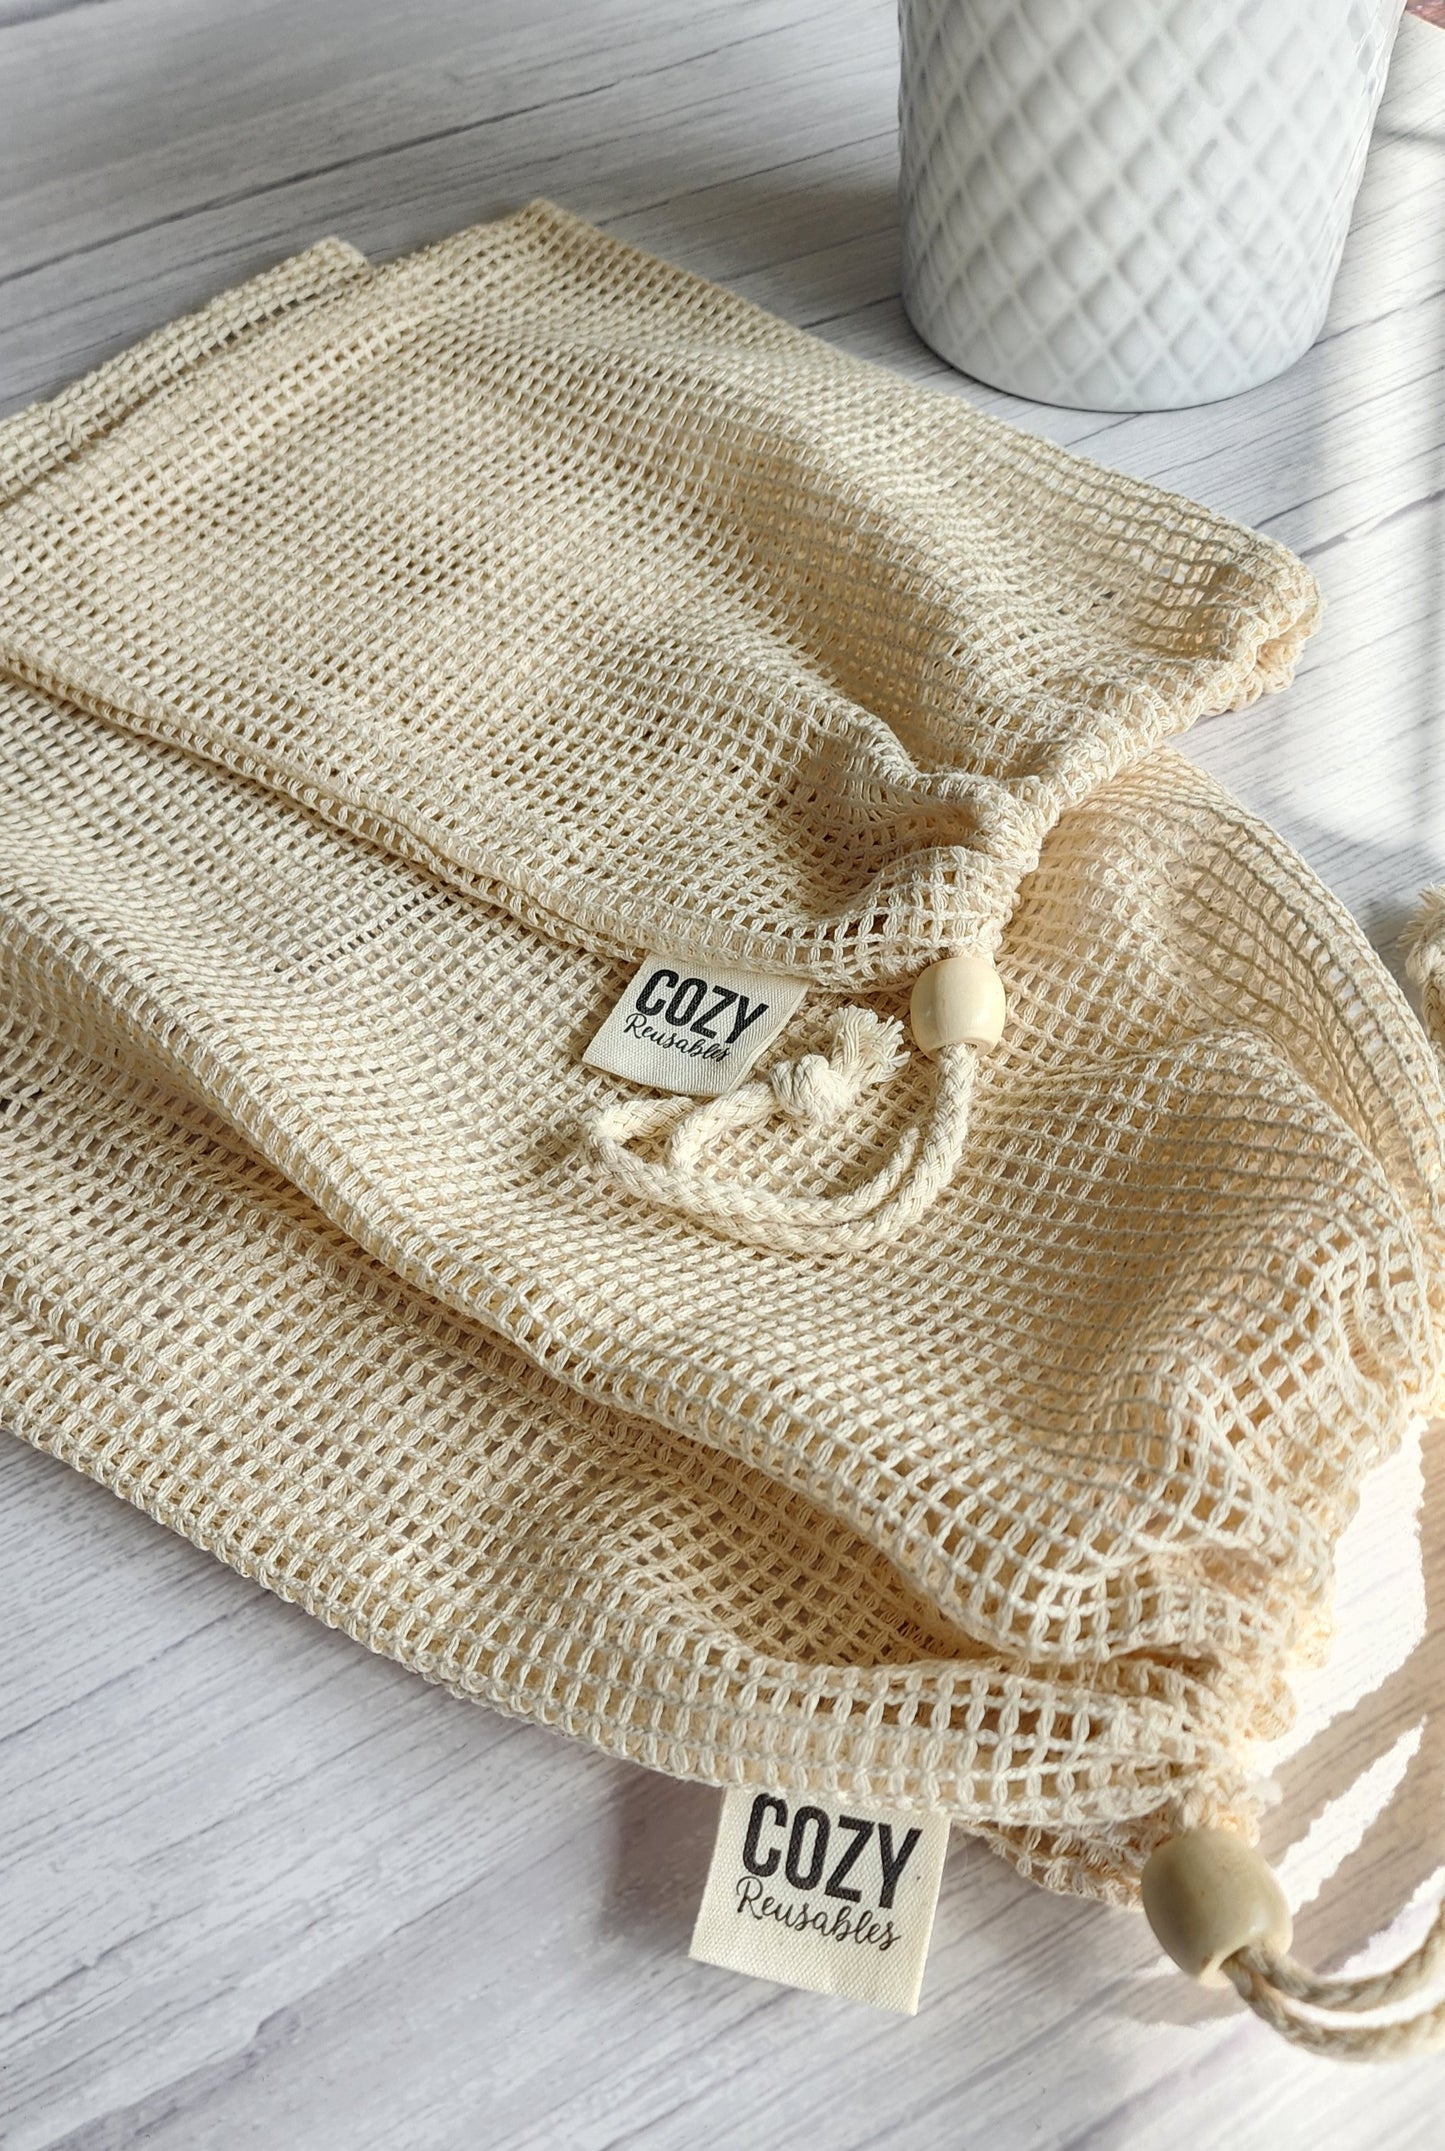 100% Cotton Produce Bags - Small & Large Drawstring Bag with Wooden Bead Closure